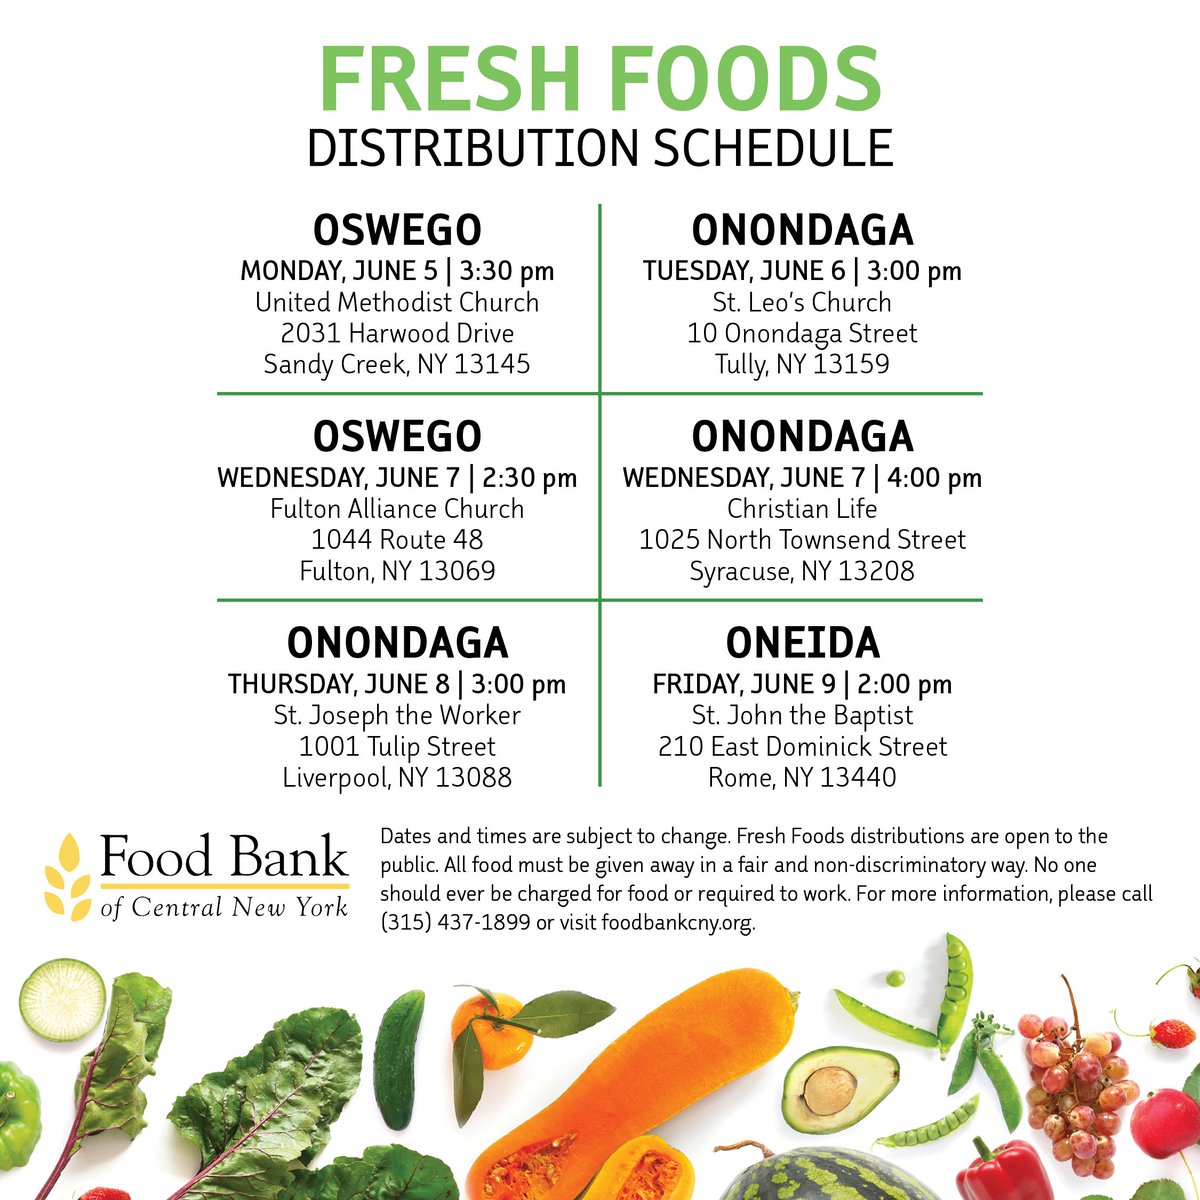 In need of fresh food items at no cost? We're here to help!
⁠
🚛: Our Mobile Food Pantry will be in #WestMonroe, #Syracuse, and #Moravia.⁠
⁠
🍎: Food Bank partner agencies are hosting distributions in #SandyCreek, #Tully, #Fulton, #Syracuse, #Liverpool, and #Rome.